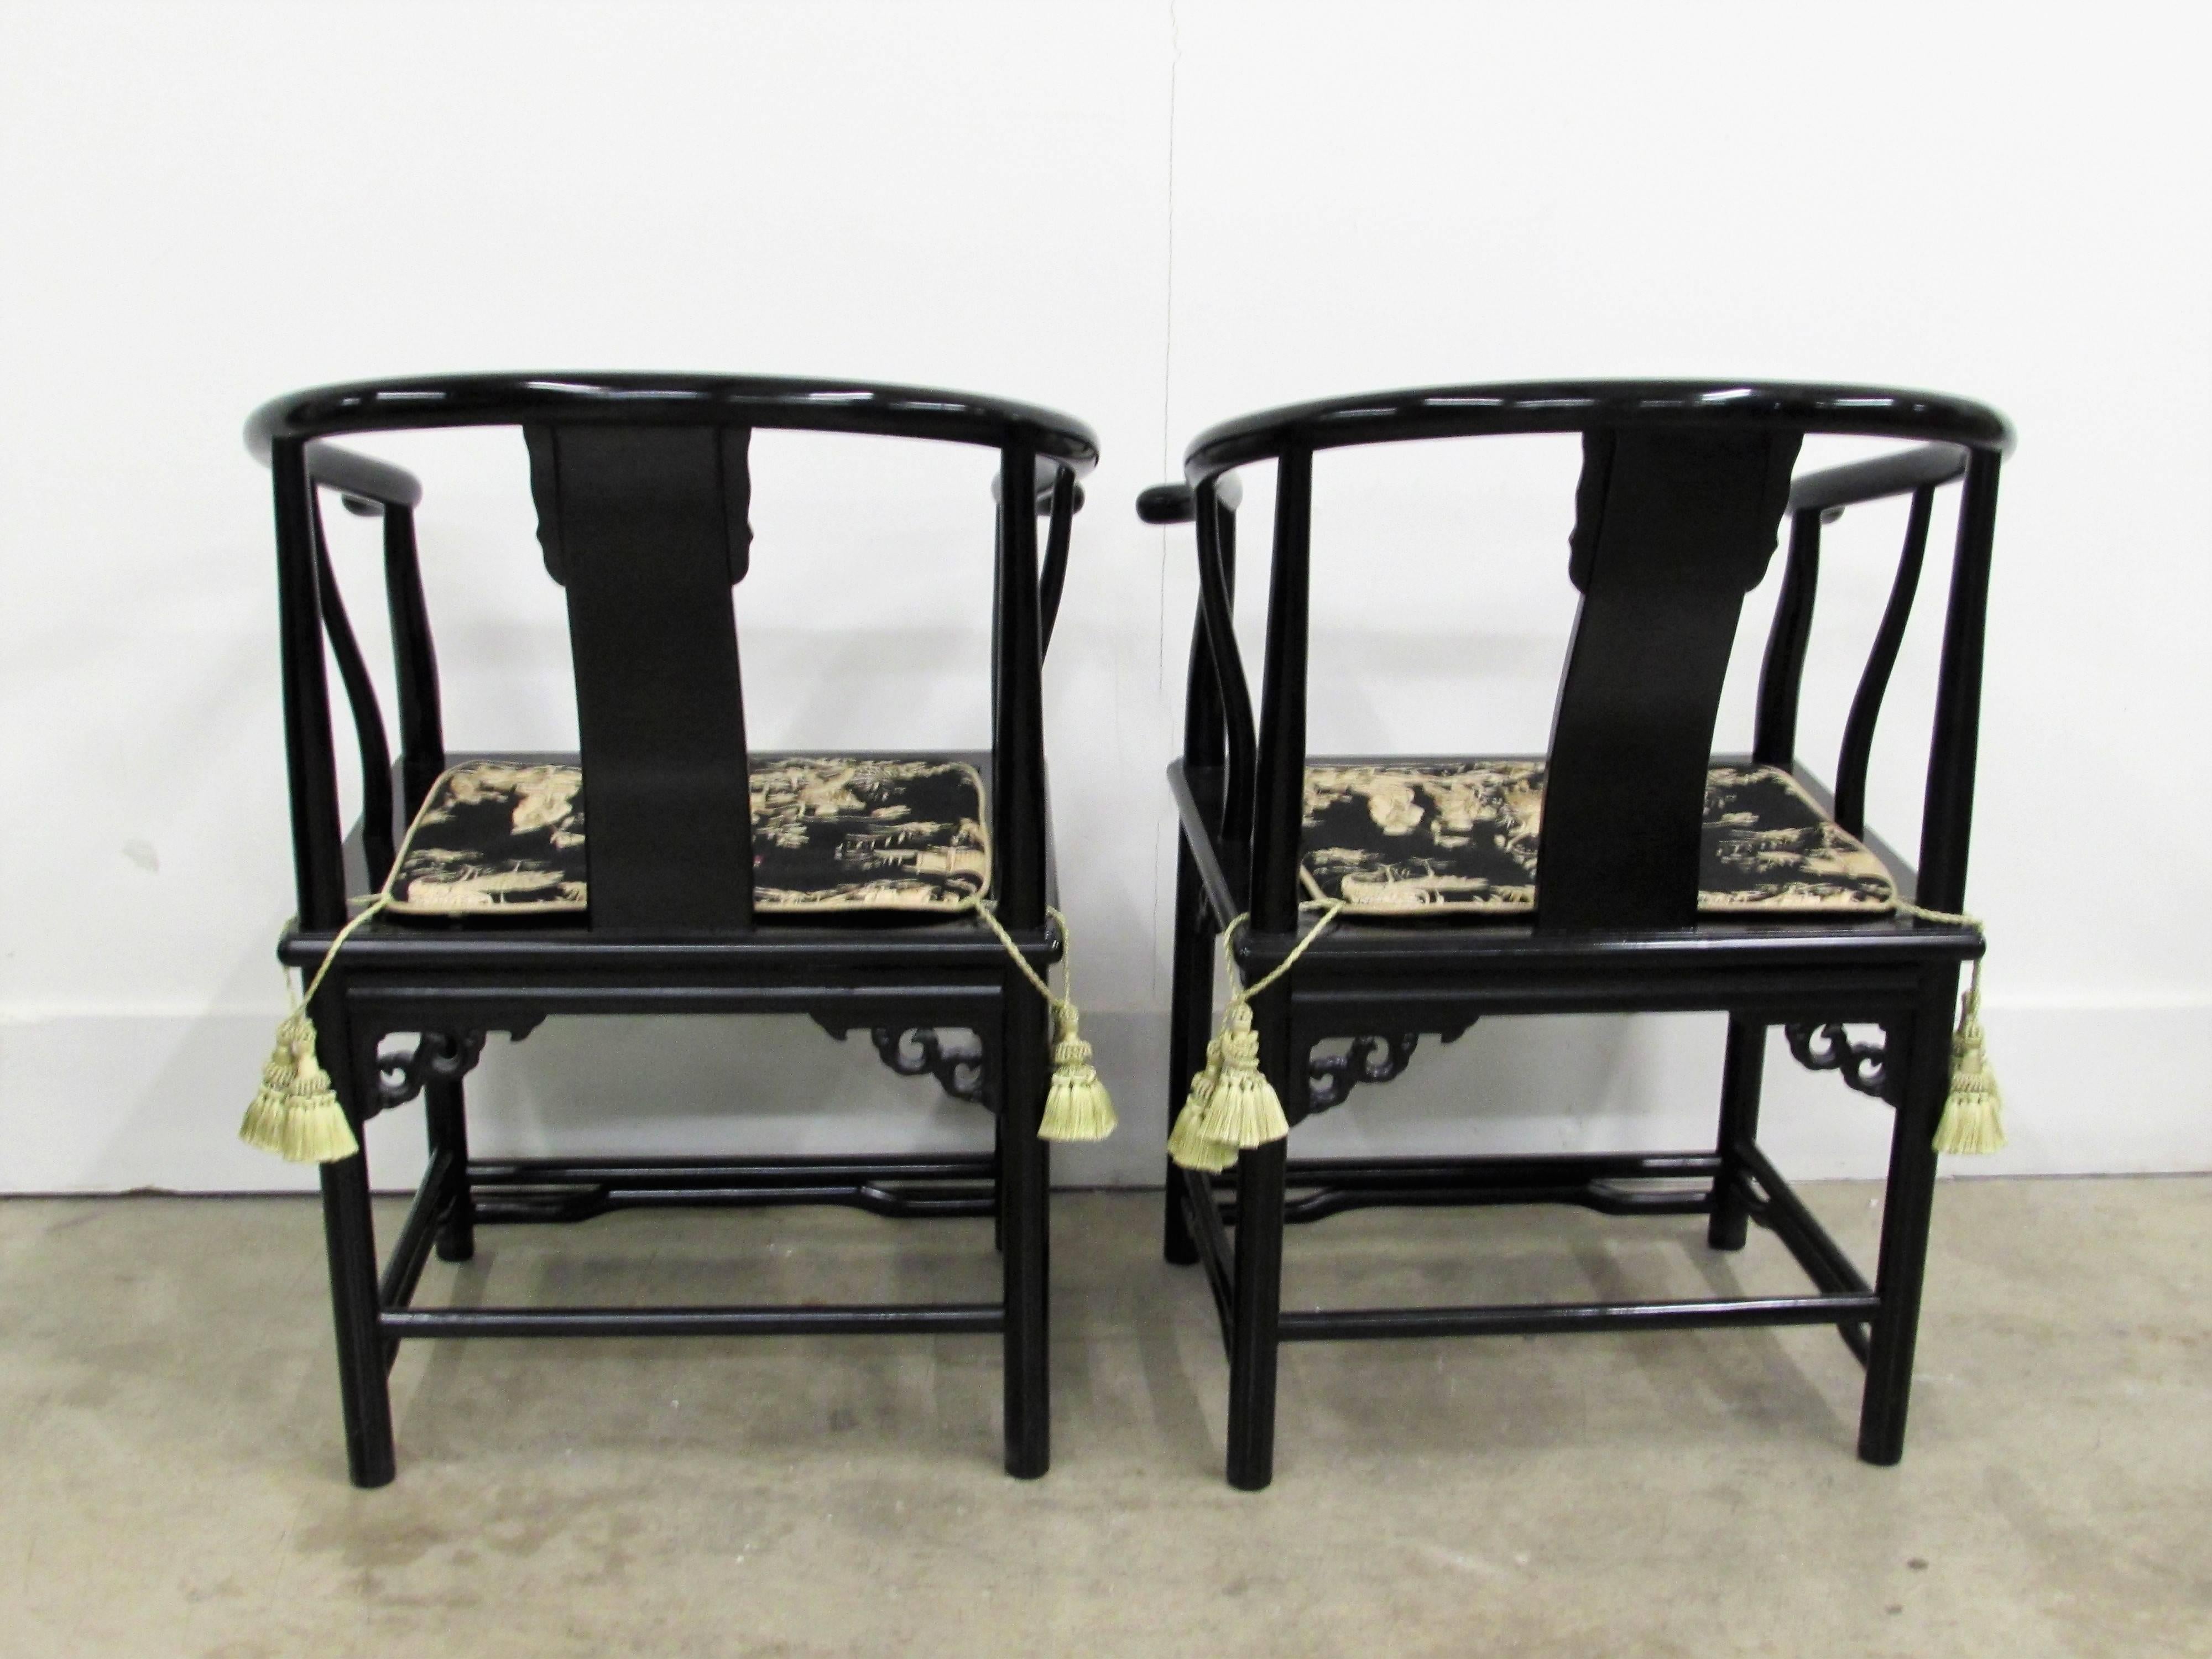 Lacquered Black Lacquer Asian Horseshoe Arm Chairs, Pair For Sale